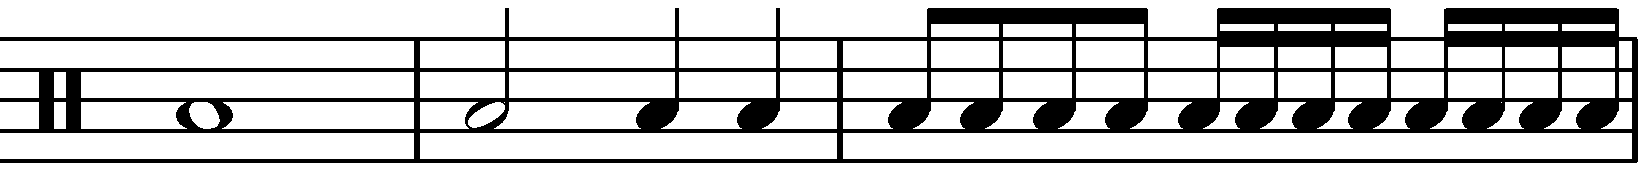 Examples of floor tom notation